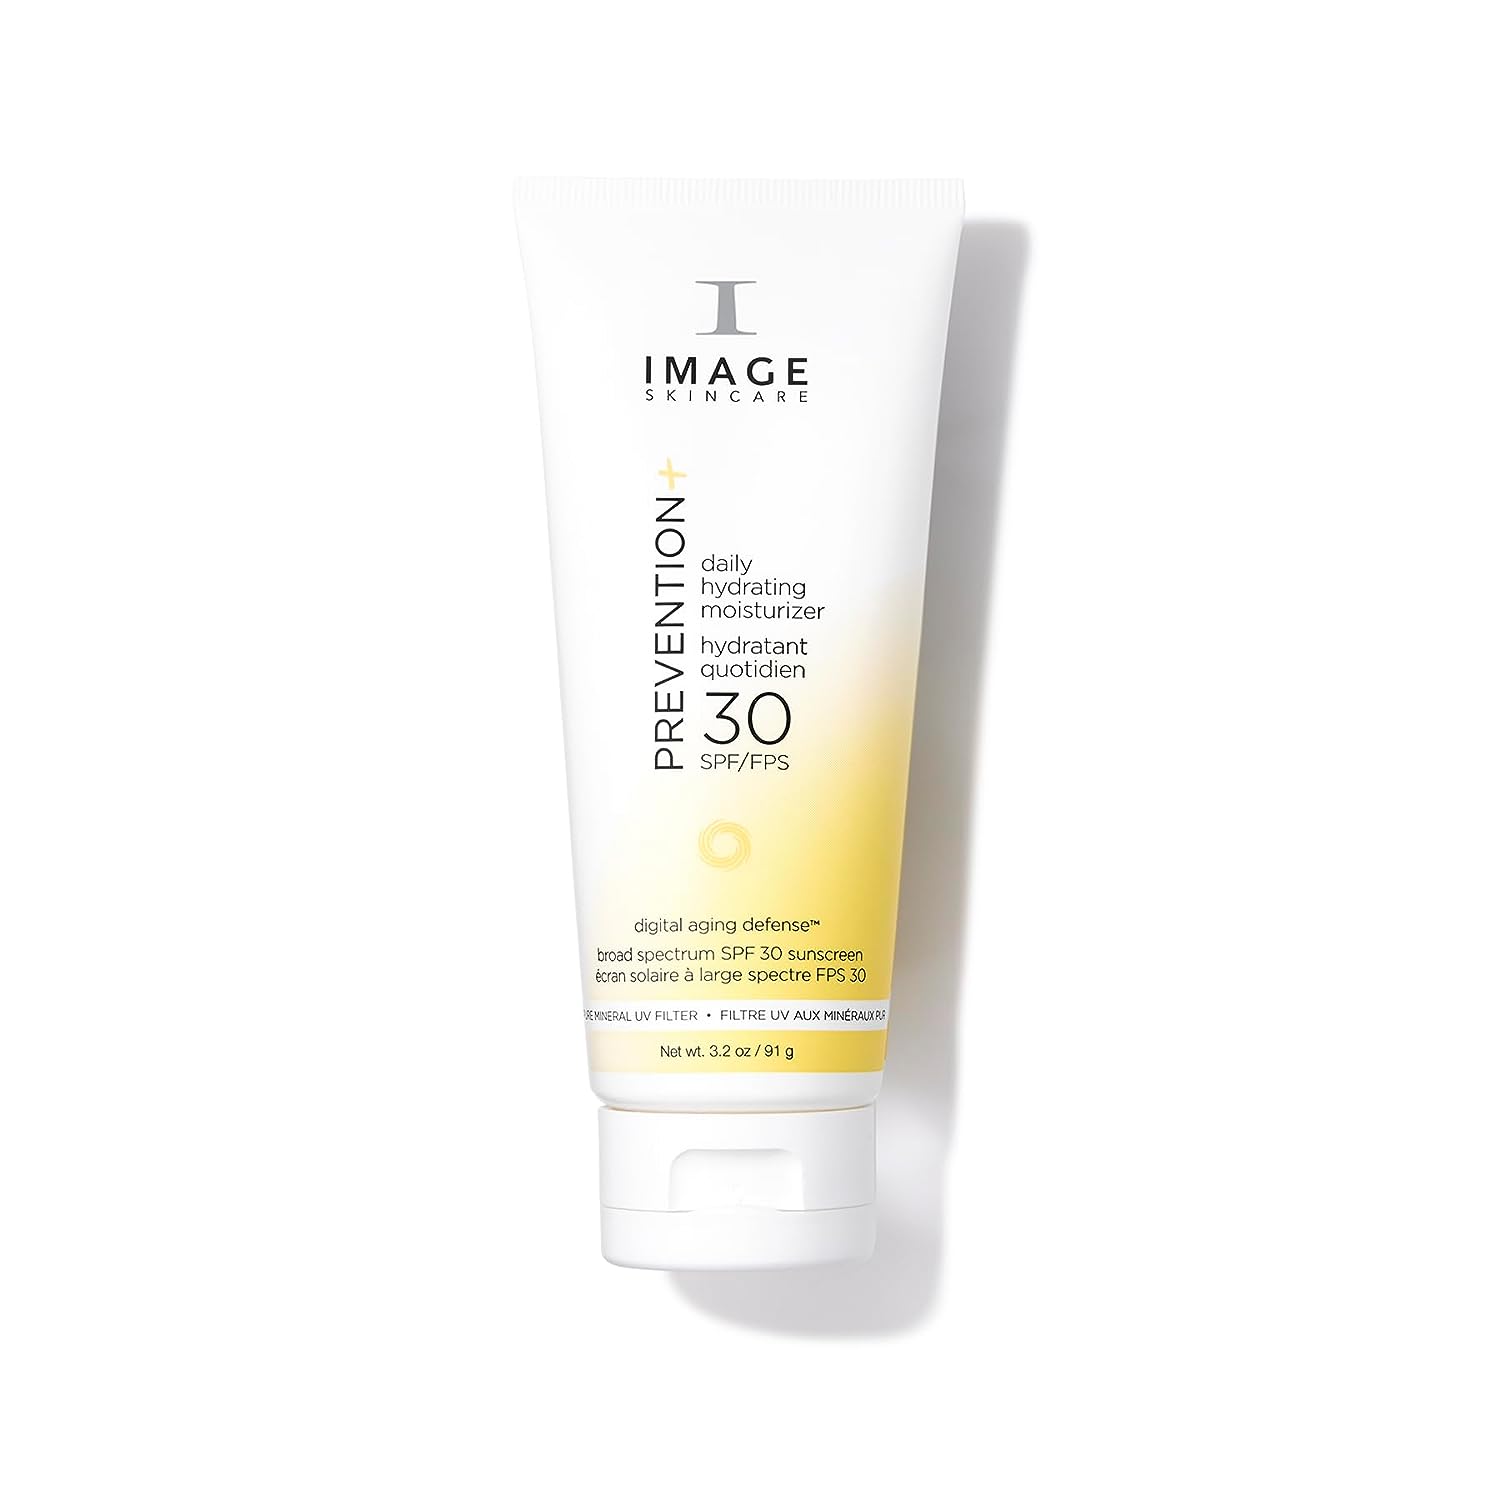 Image Skincare Prevention Daily Hydrating Moisturizer + Aging Defence Broad Spectrum SPF 30, 3.2 oz - image 1 of 9